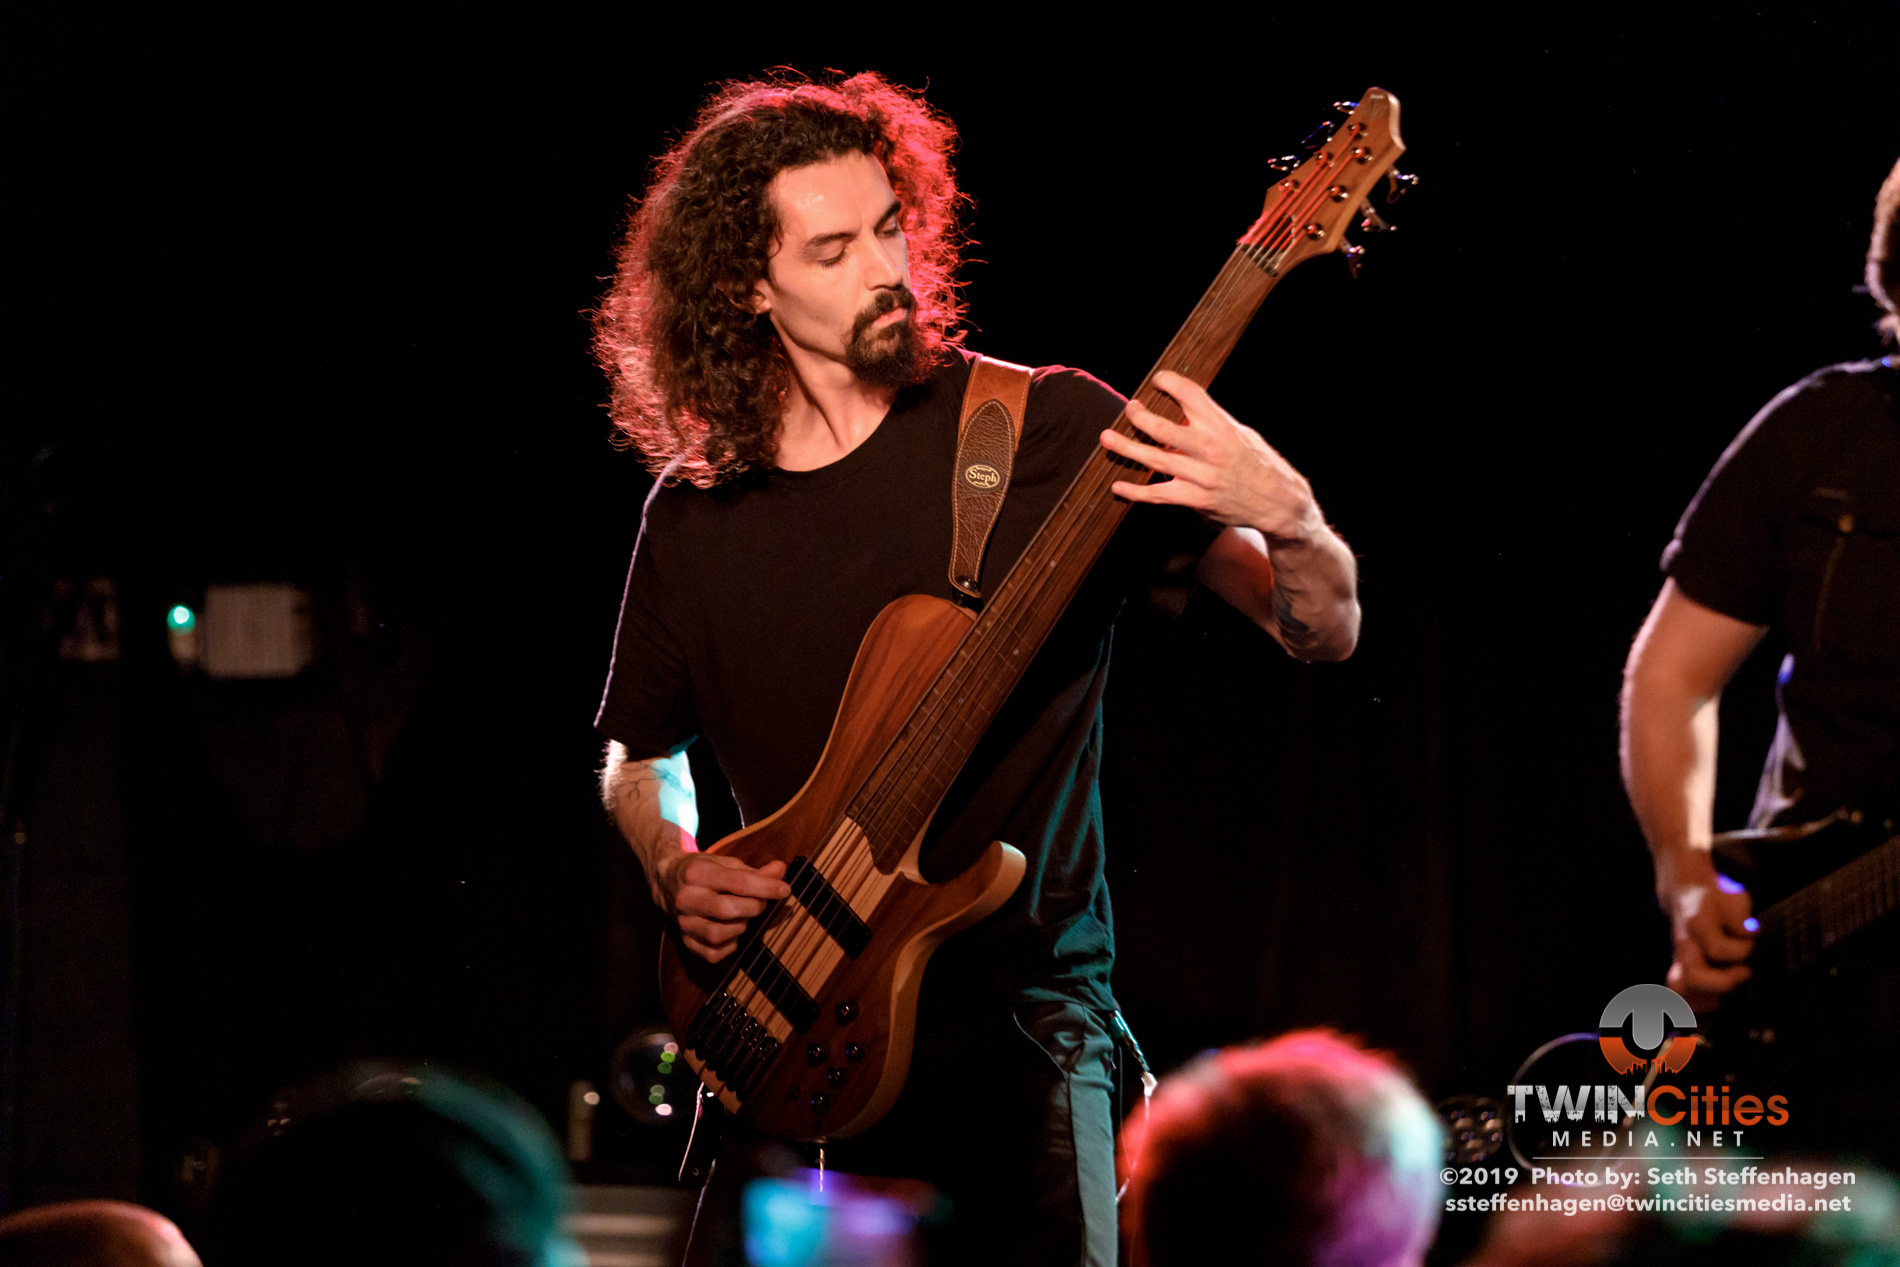 October 5, 2019 - Minneapolis, Minnesota, United States -  Gone In April live in concert at The Cabooze opening for Eluveitie + Korpiklaani.

(Photo by Seth Steffenhagen/Steffenhagen Photography)